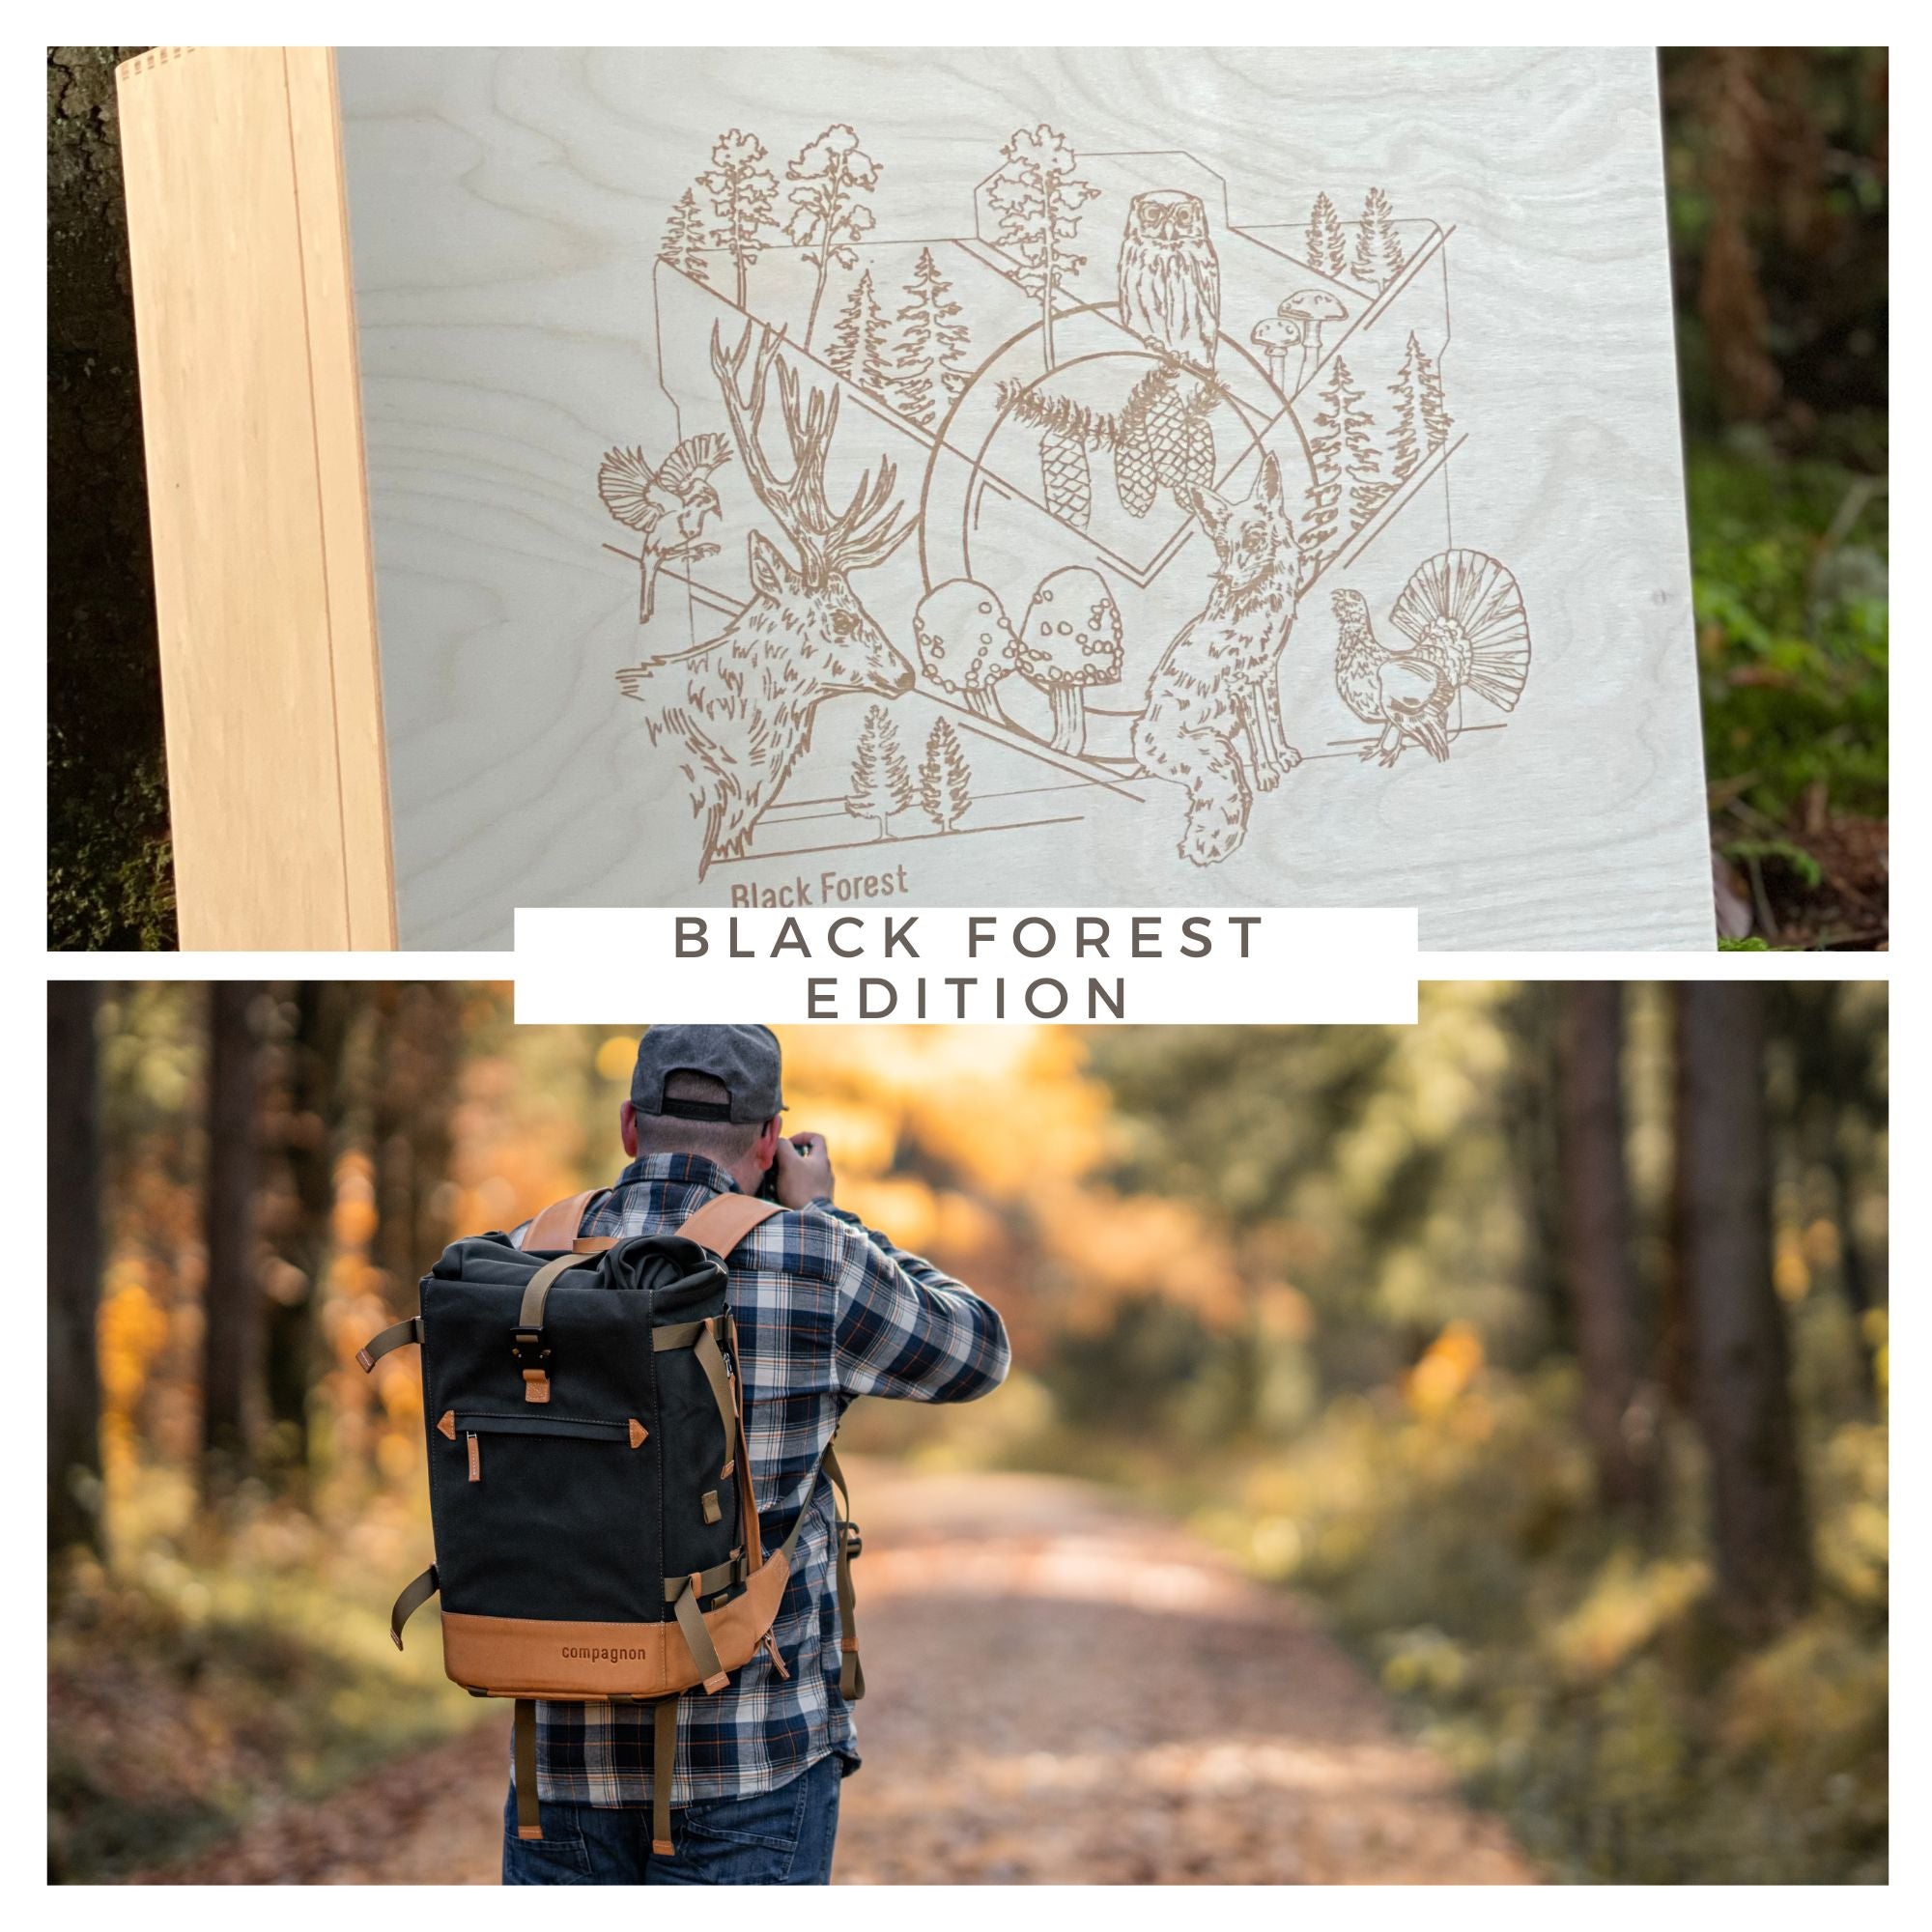 The Black Forest Edition - Ab 17. Dezember